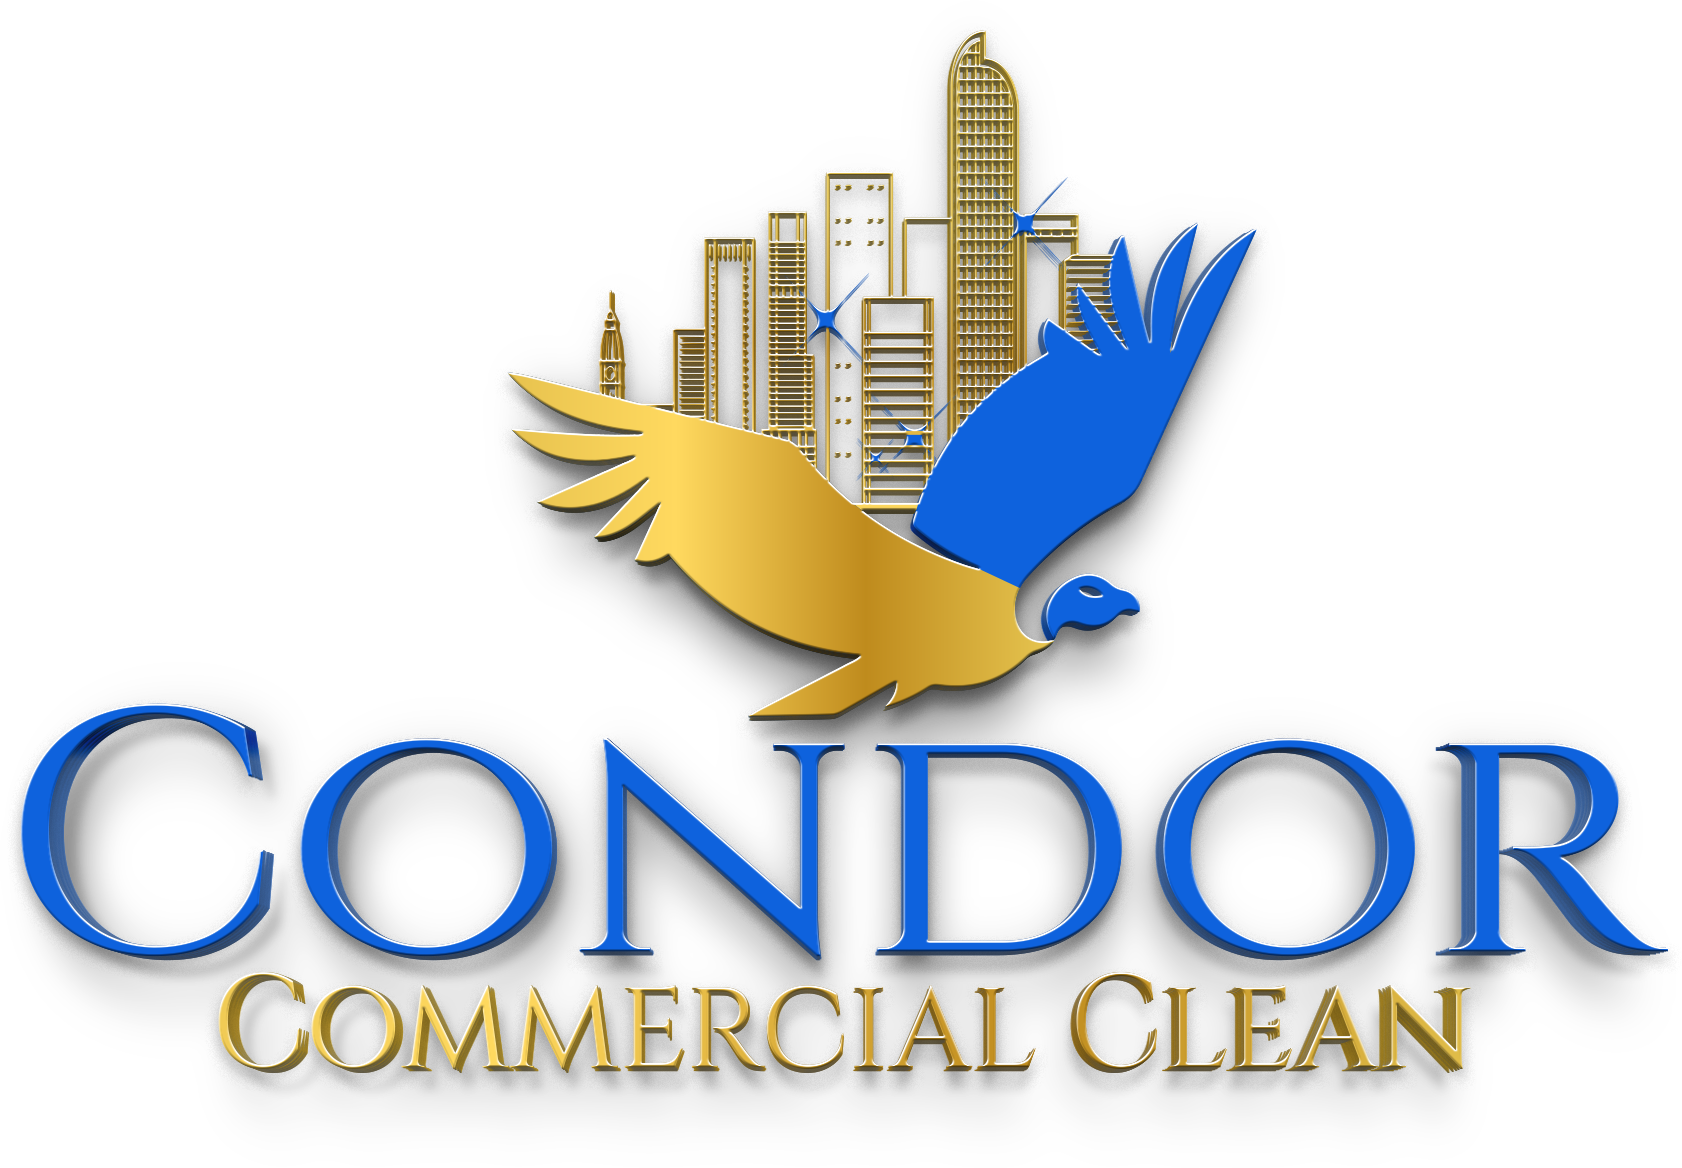 Condor Commercial Clean - Cleaning Services in Denver